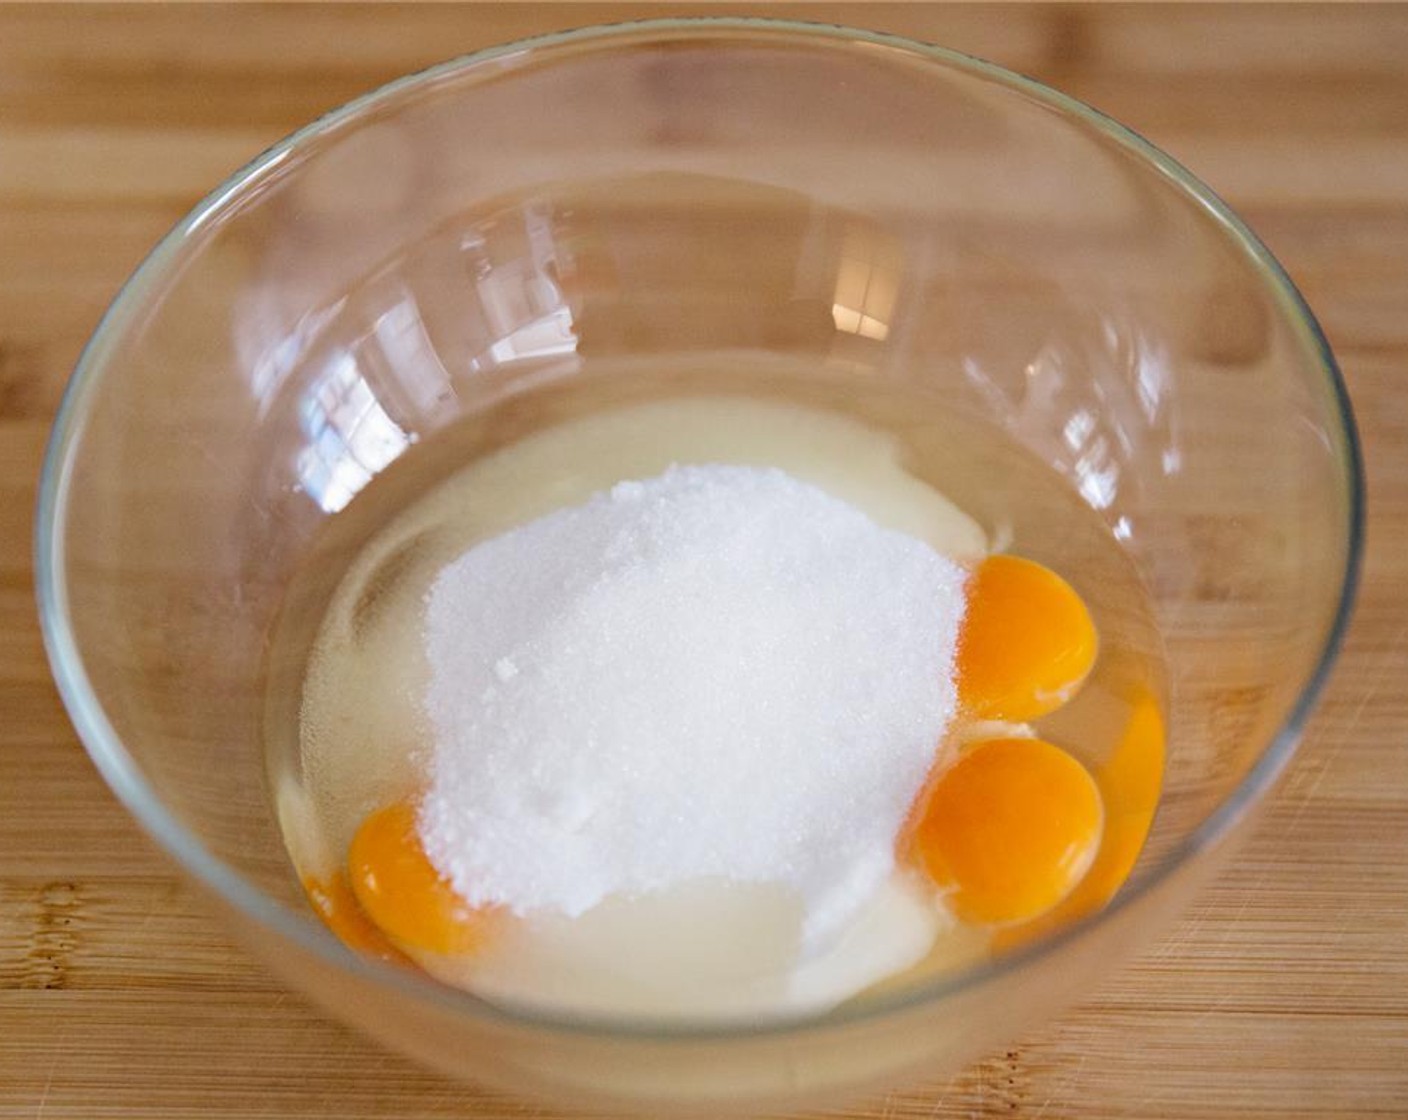 step 2 While the milk mixture is coming up to a boil, whisk the Caster Sugar (1 cup) and Eggs (3) together.